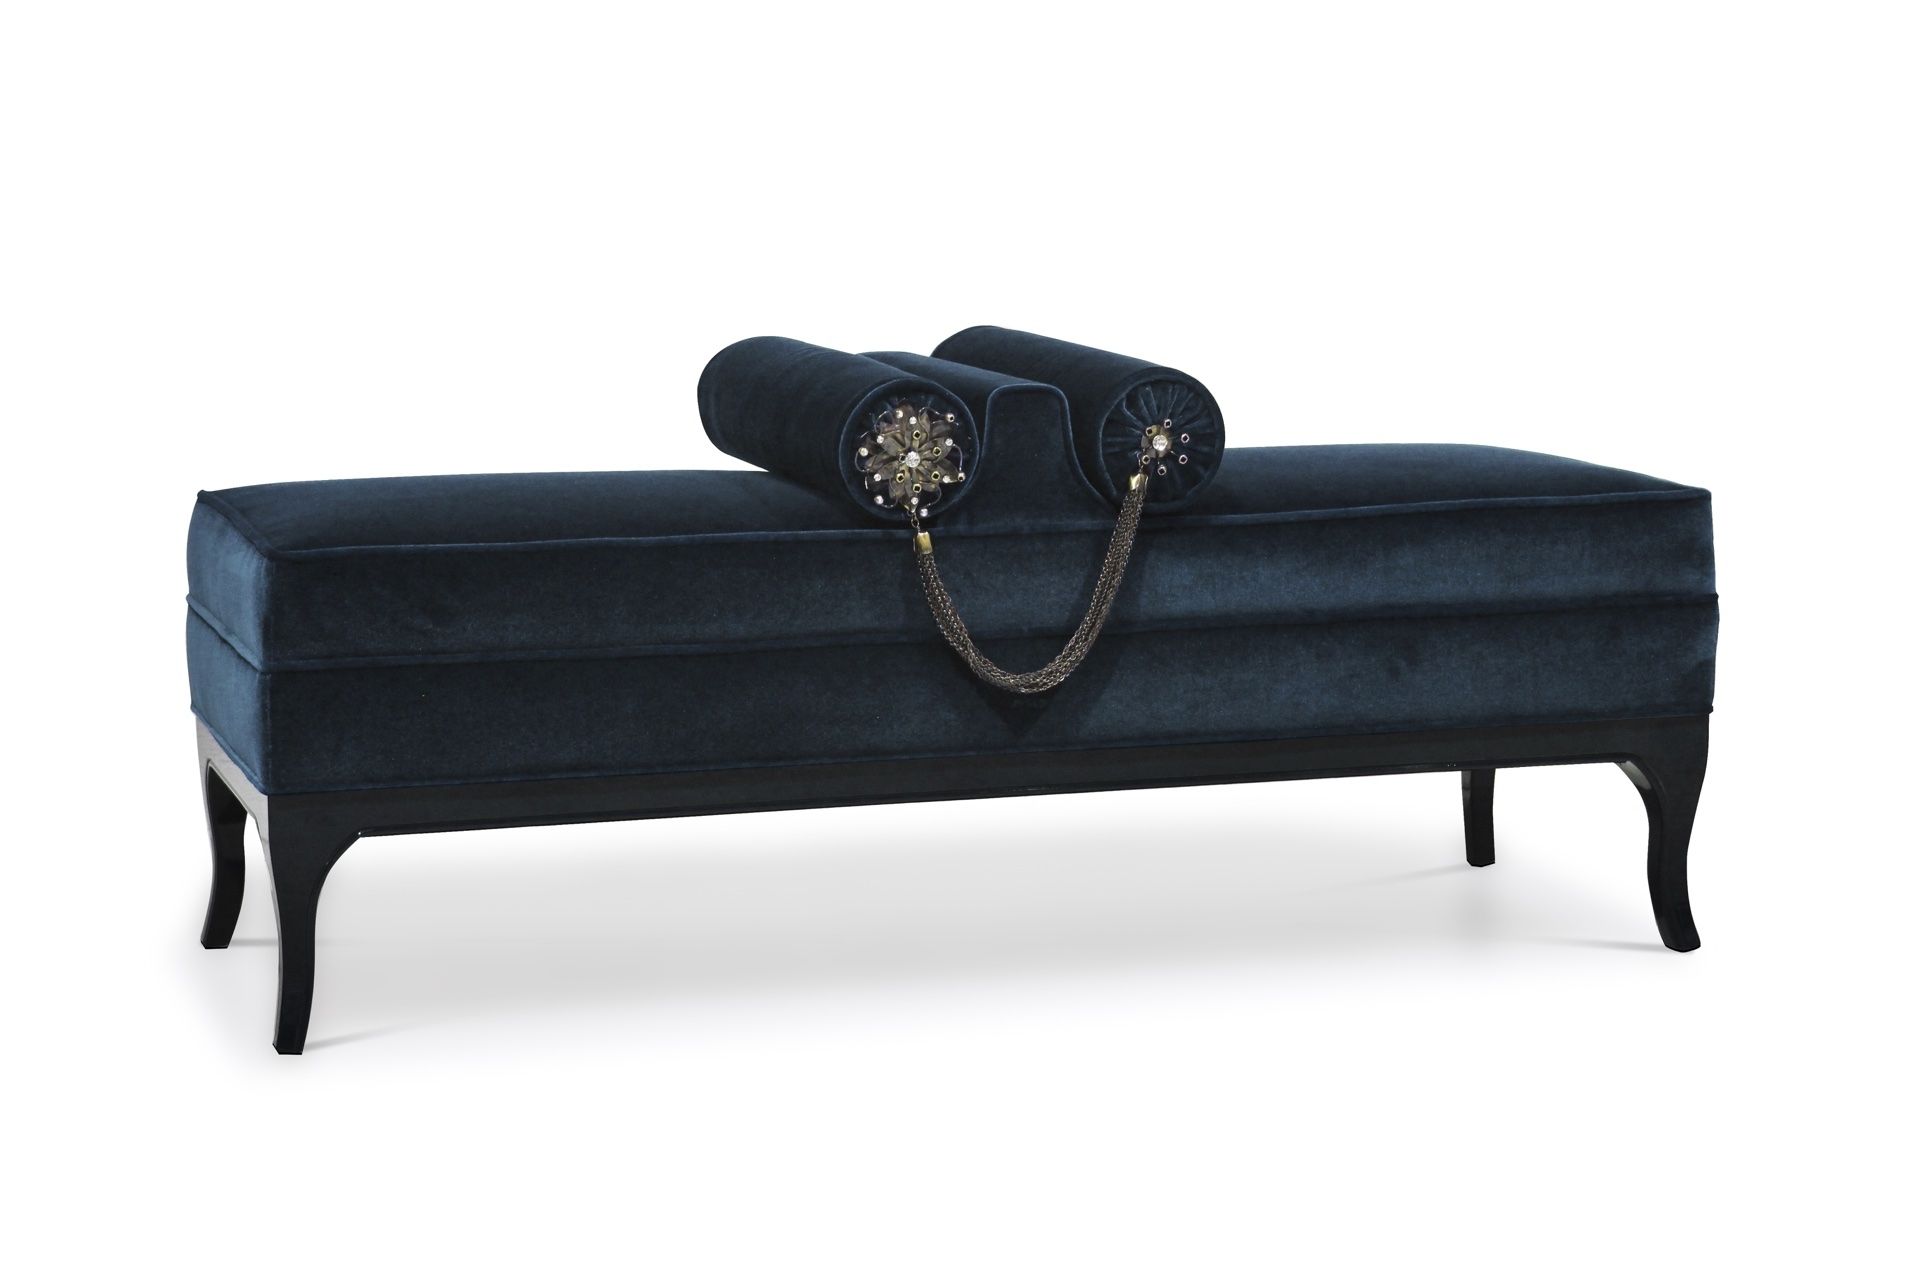 Chaise Benchs Pertaining To Fashionable The Best Benches And Chaises For Your Home Decor (Photo 8 of 15)